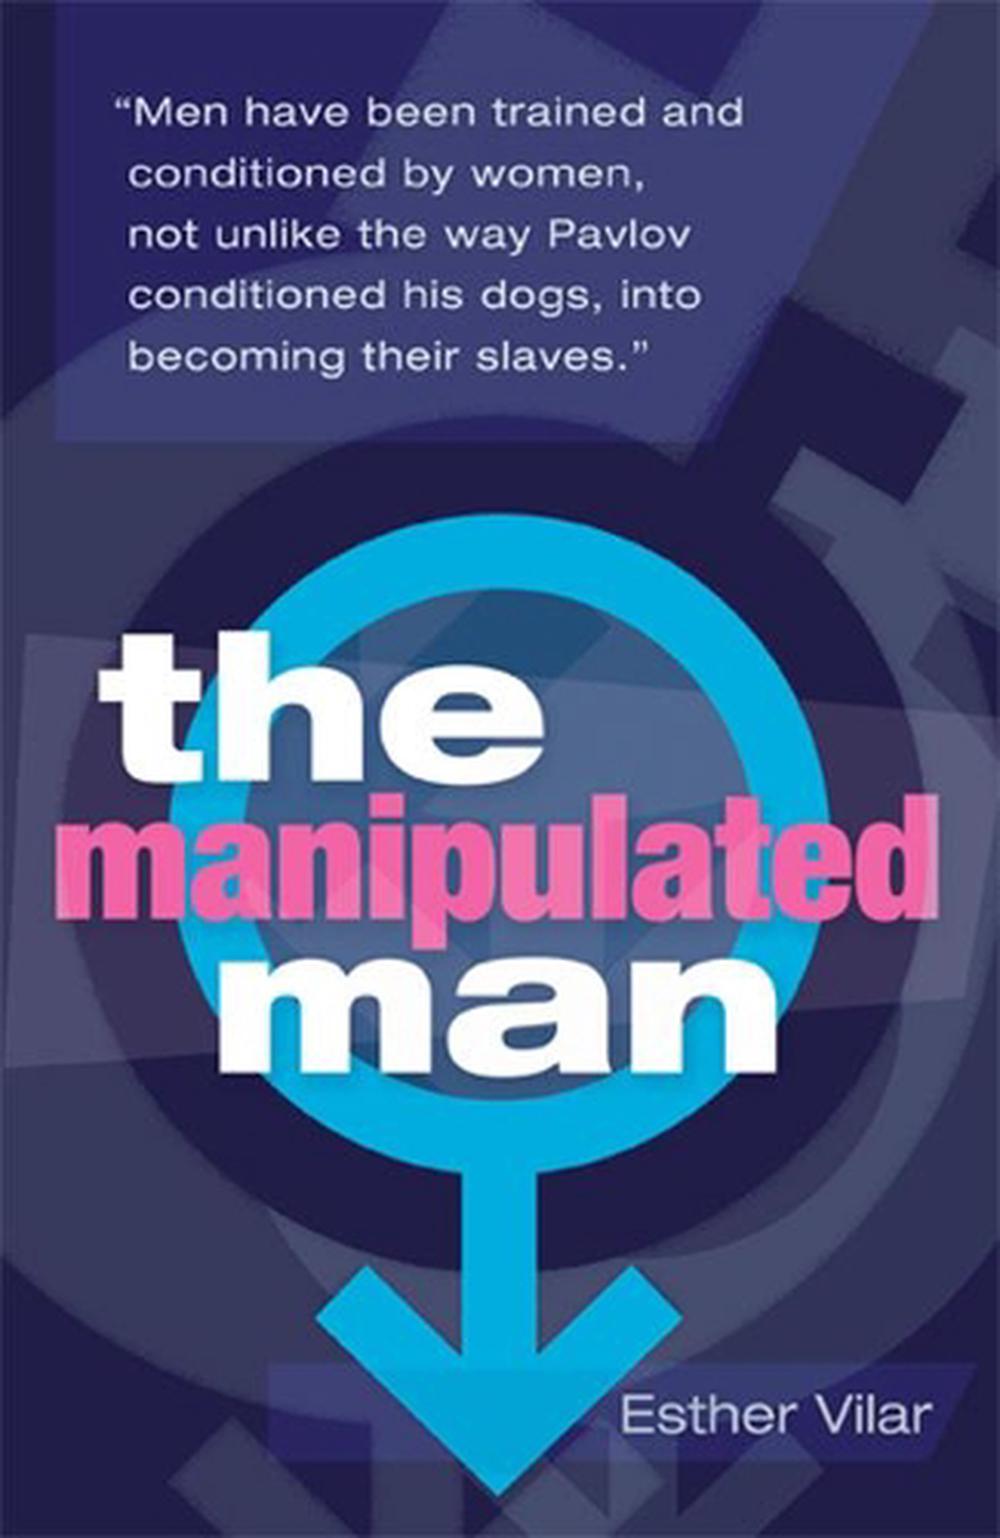 the manipulated man book by esther vilar